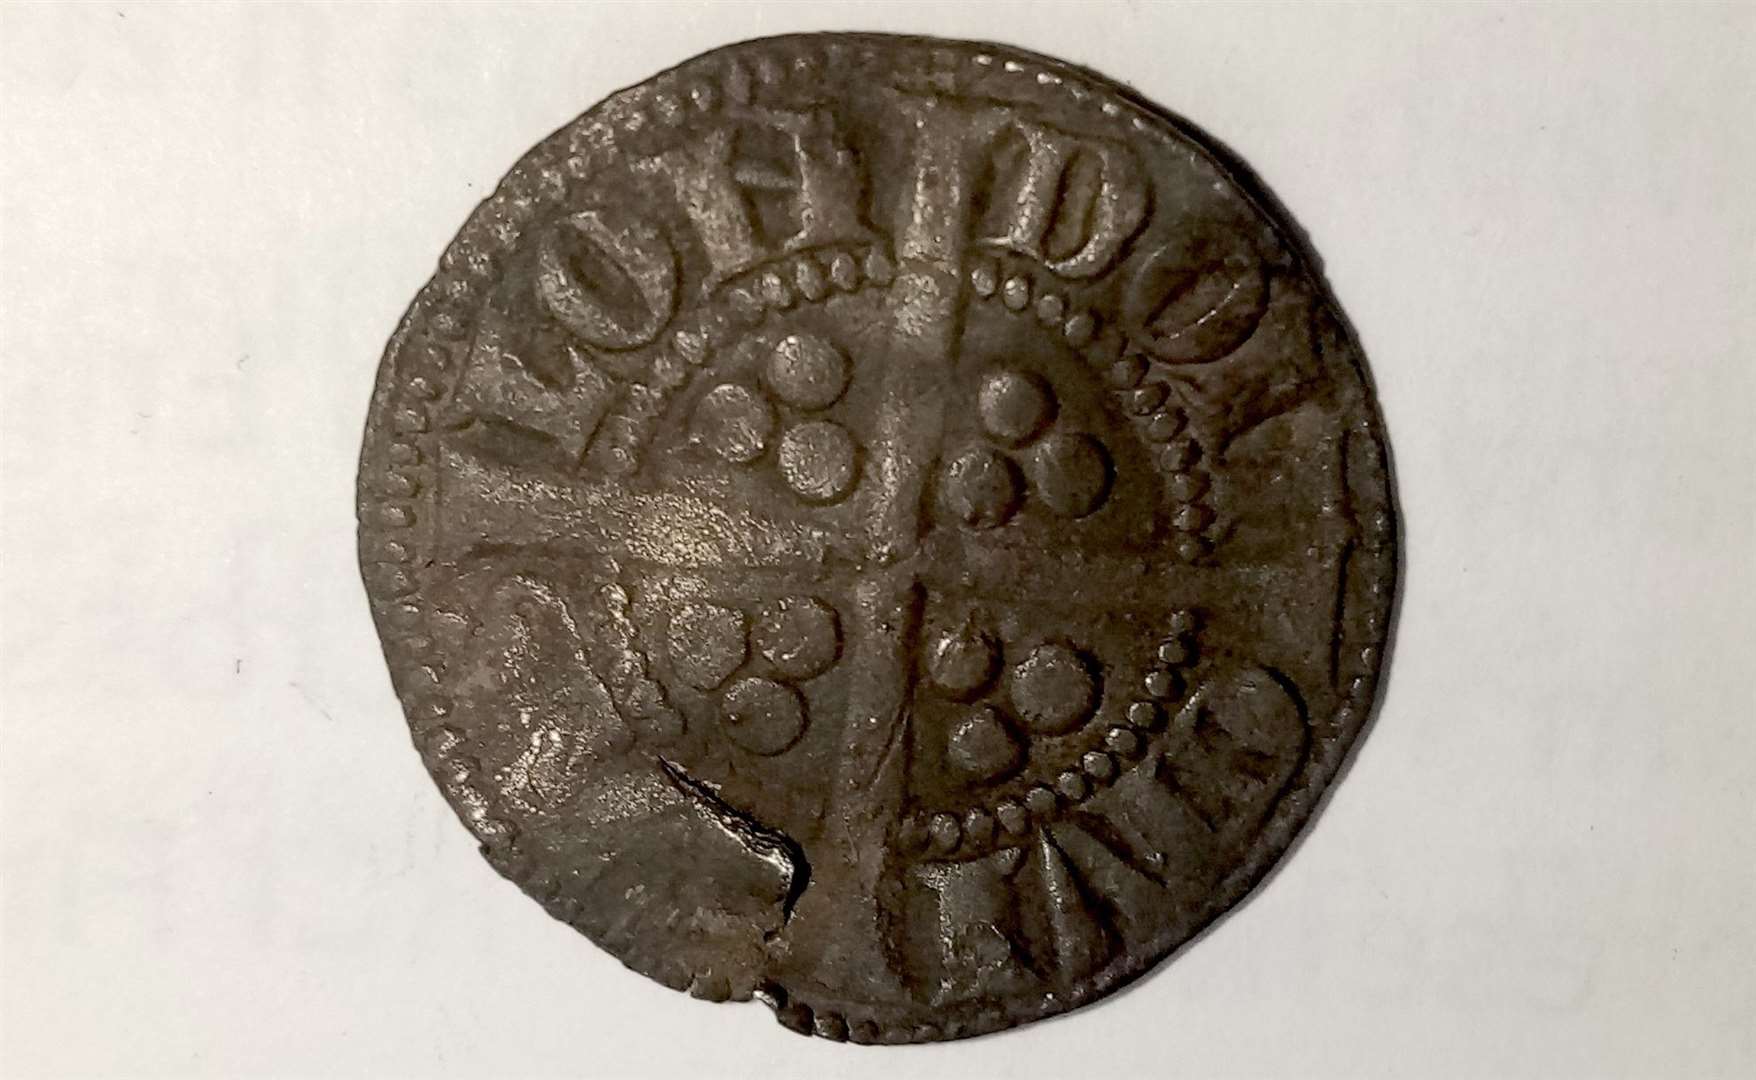 The silver penny dates from time of Edward I, also known as Edward Longshanks and the Hammer of the Scots.